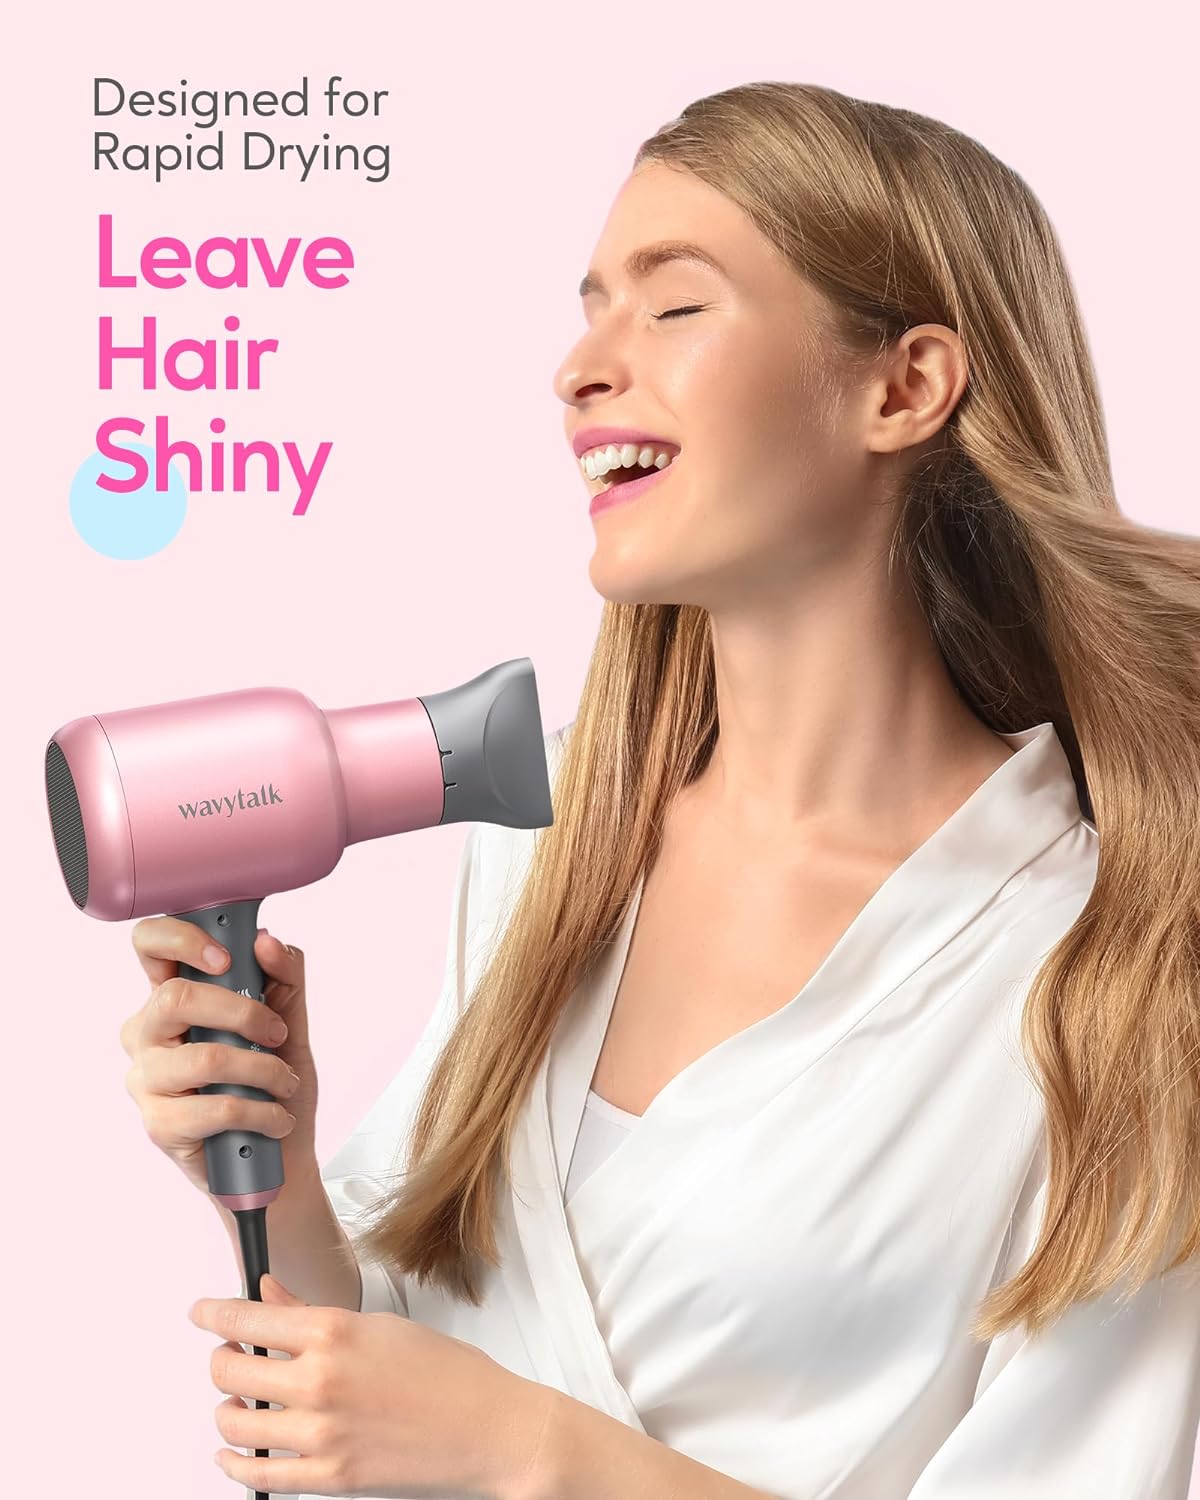 Professional Ionic Hair Dryer Blow Dryer with Diffuser and Concentrator for Curly Hair 1875 Watt Negative Ions Dryer with Ceramic Technology Nozzle for Fast Drying as Salon Light and Quiet - HealthFulBeautyLife